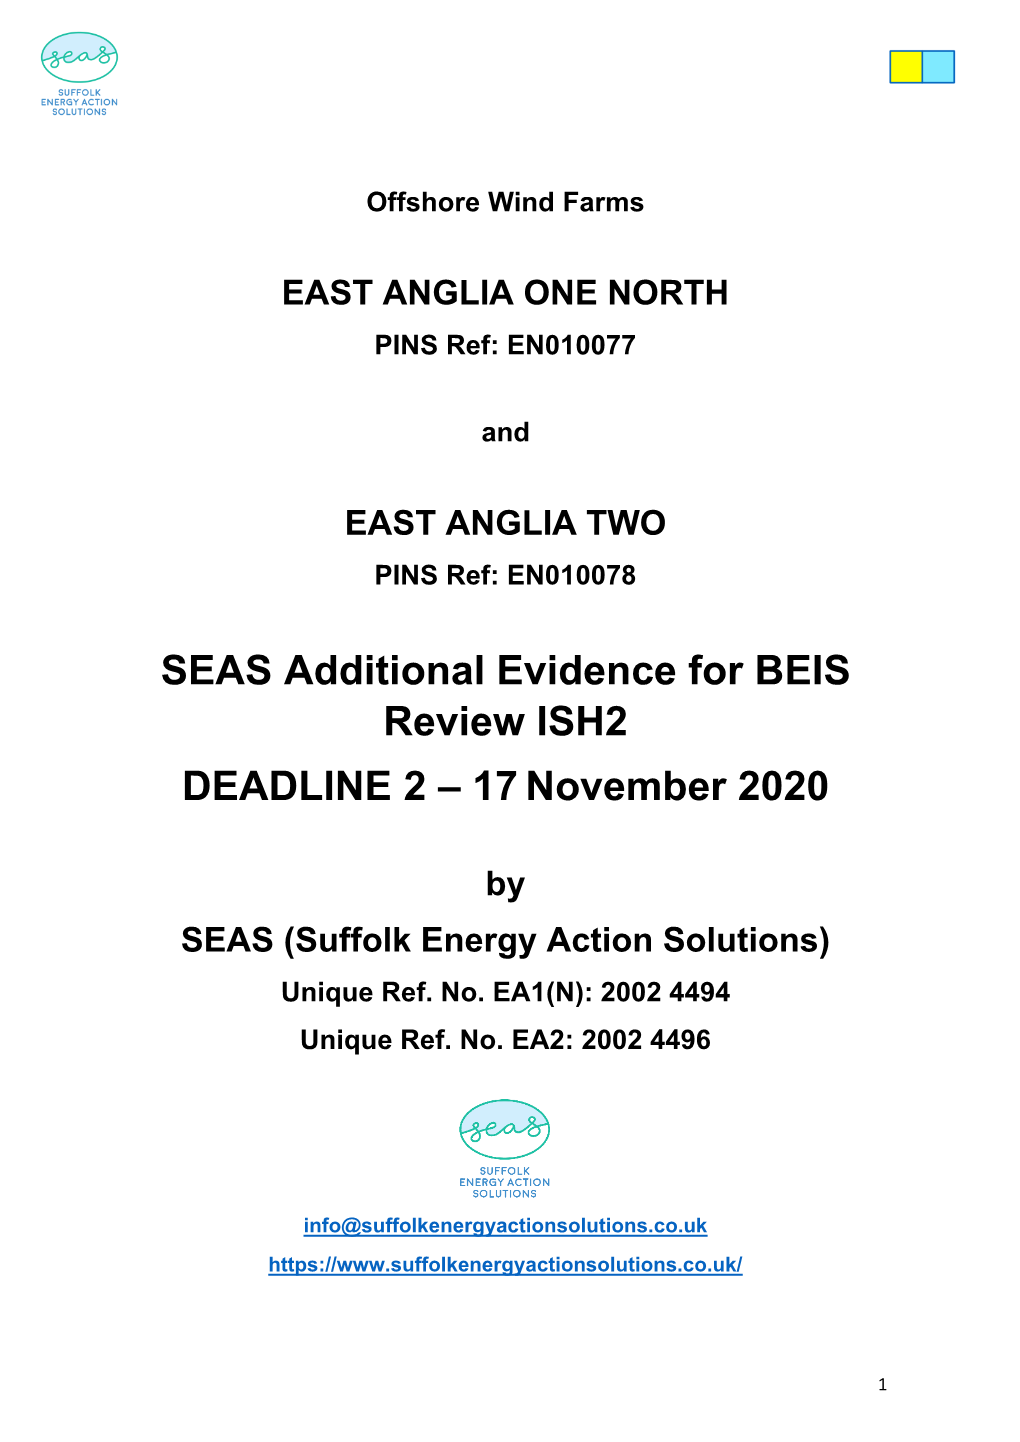 SEAS Additional Evidence for BEIS Review ISH2 DEADLINE 2 – 17 November 2020